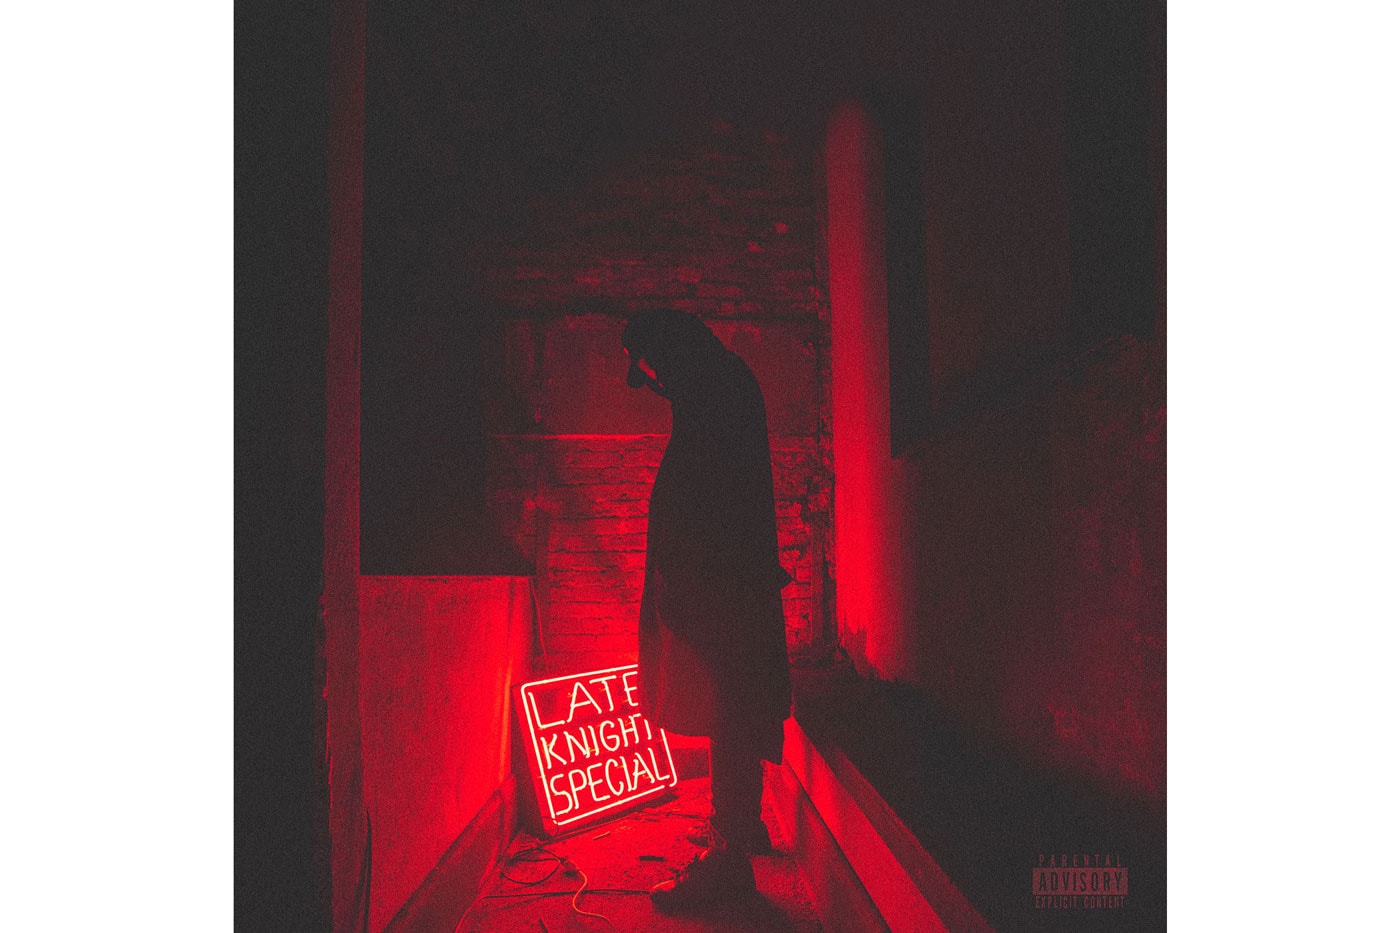 Pro Era's Kirk Knight Announces New Album and Shares New Single